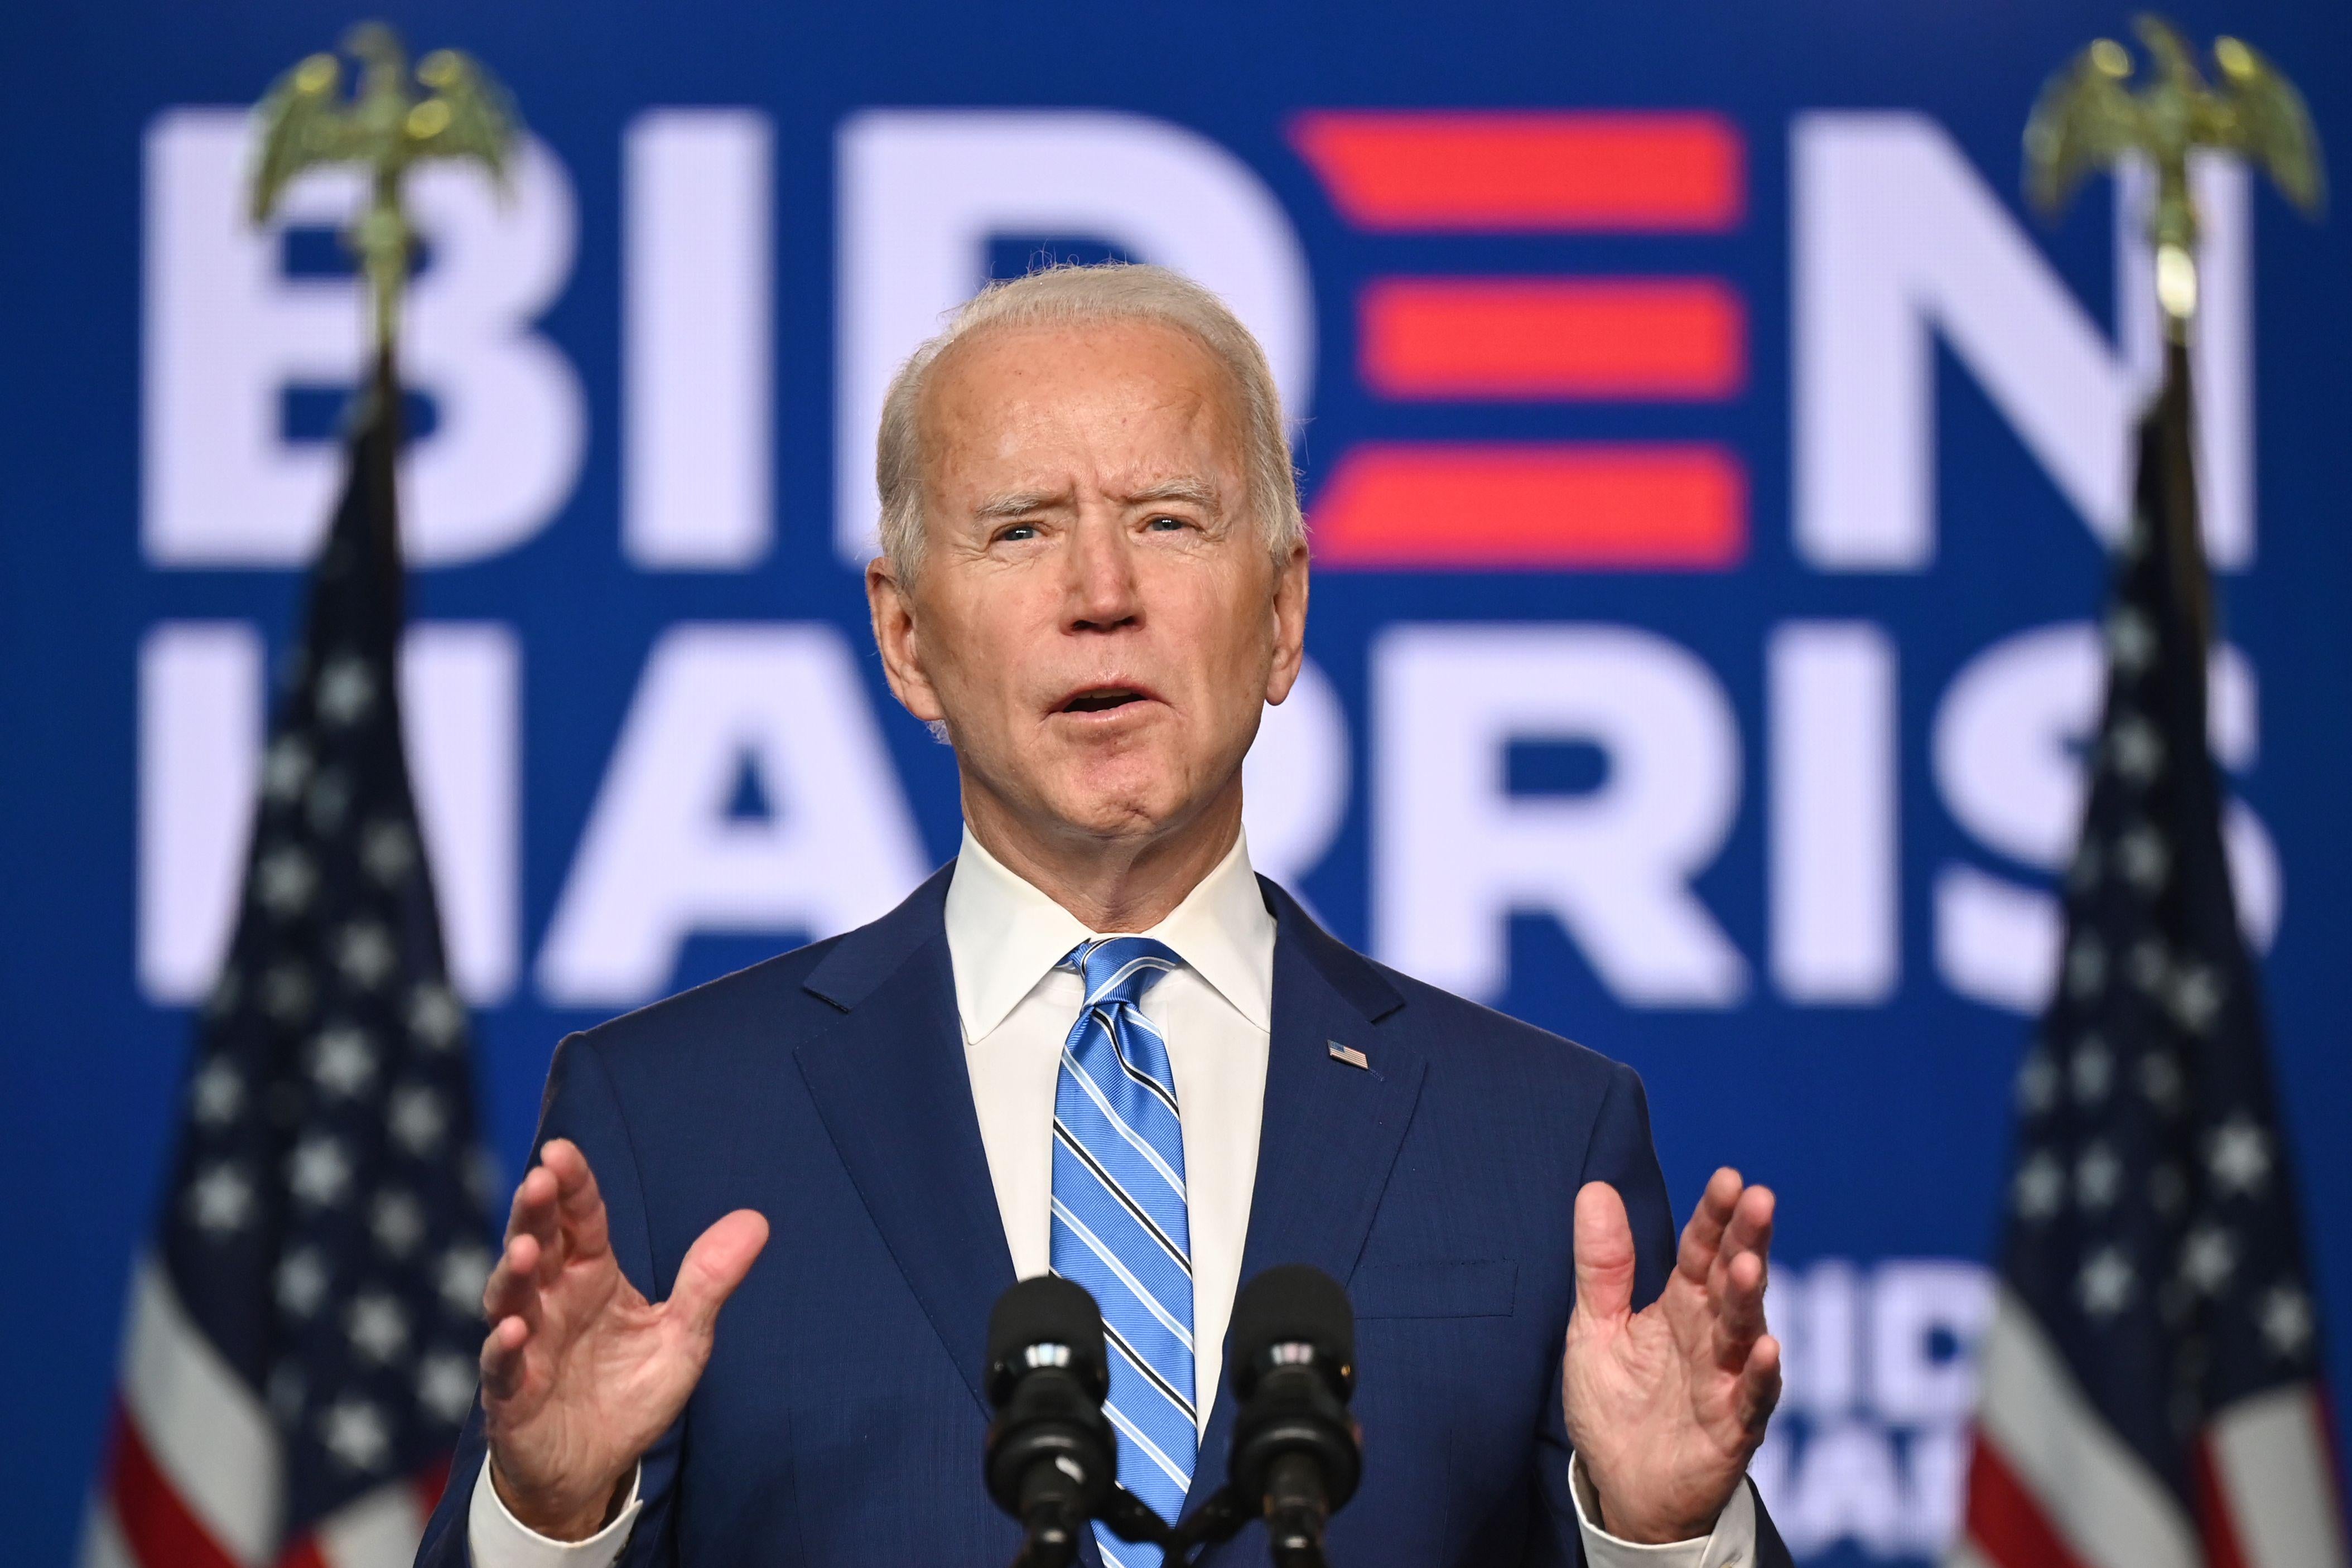 Joe Biden holds both hands up in front of him while speaking from behind a microphone.